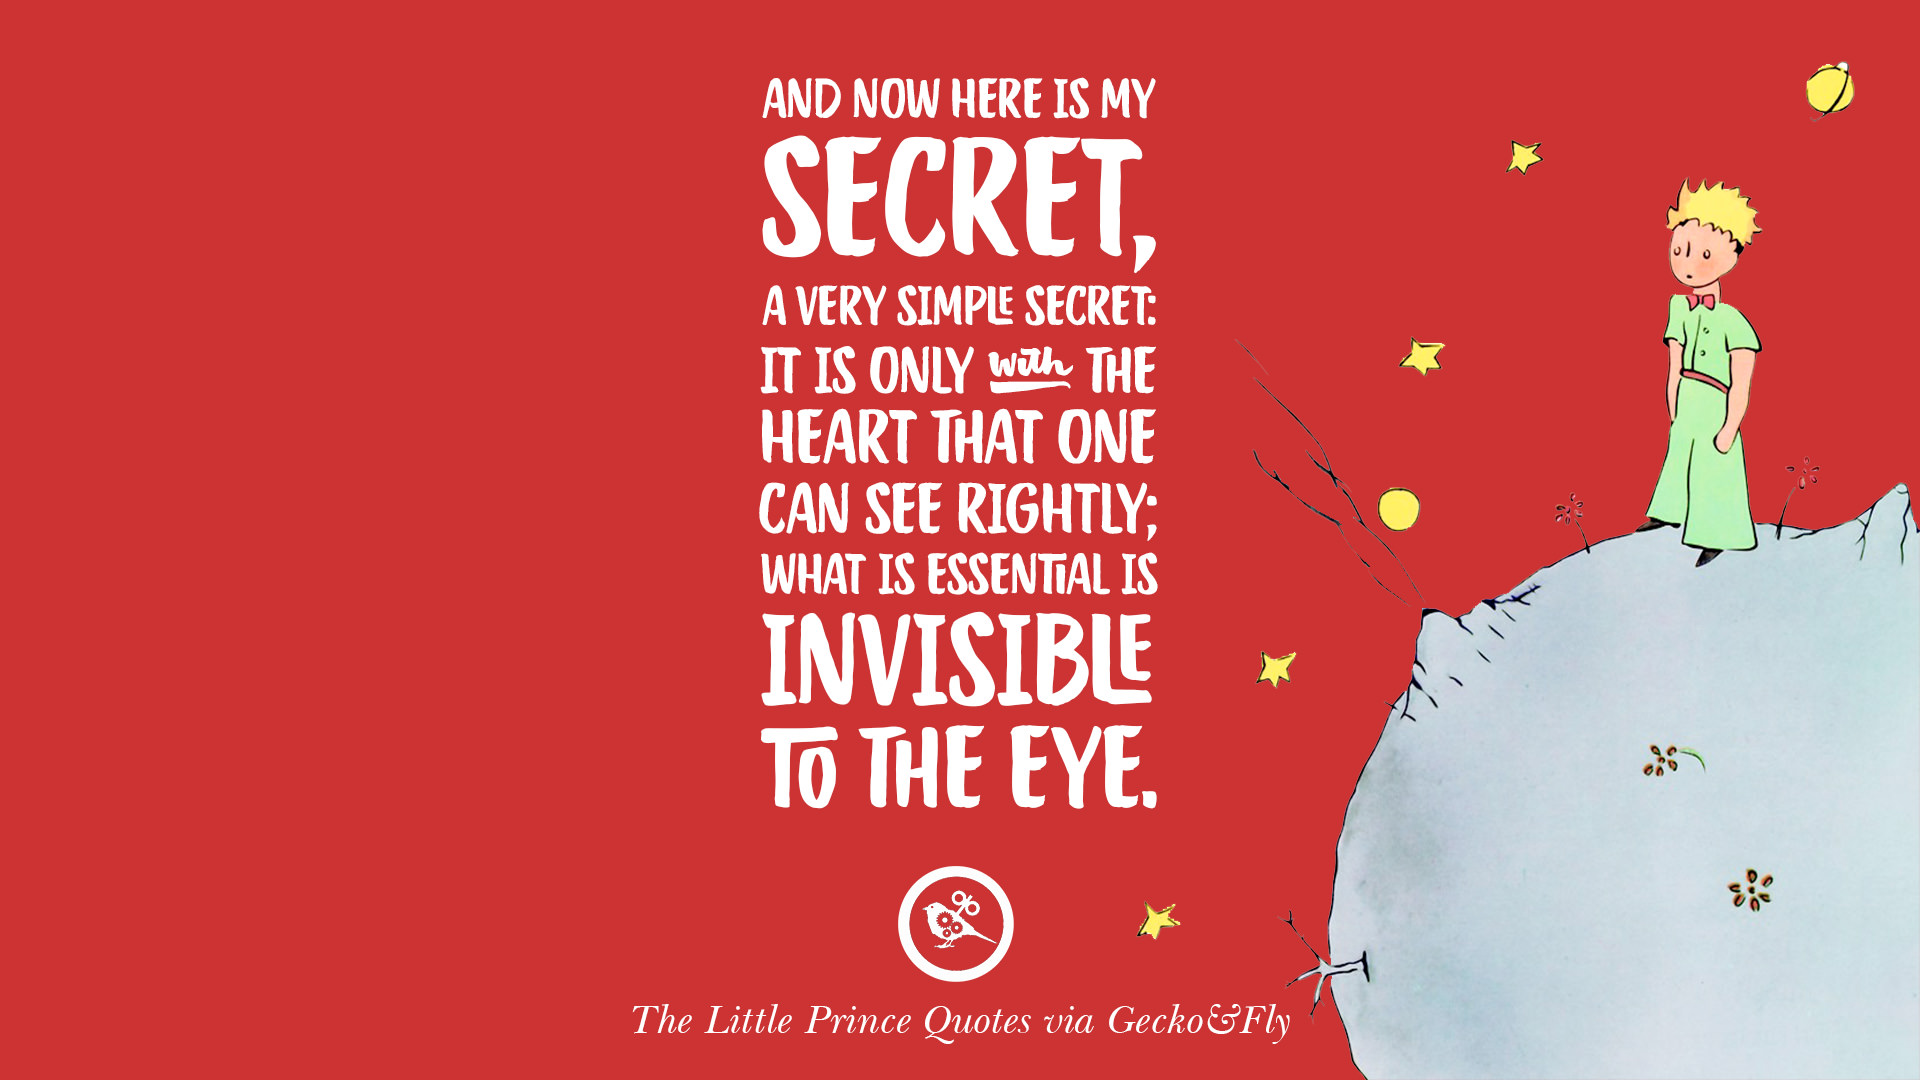 12 Quotes By The Little Prince On Life Lesson True Love And Responsibilities